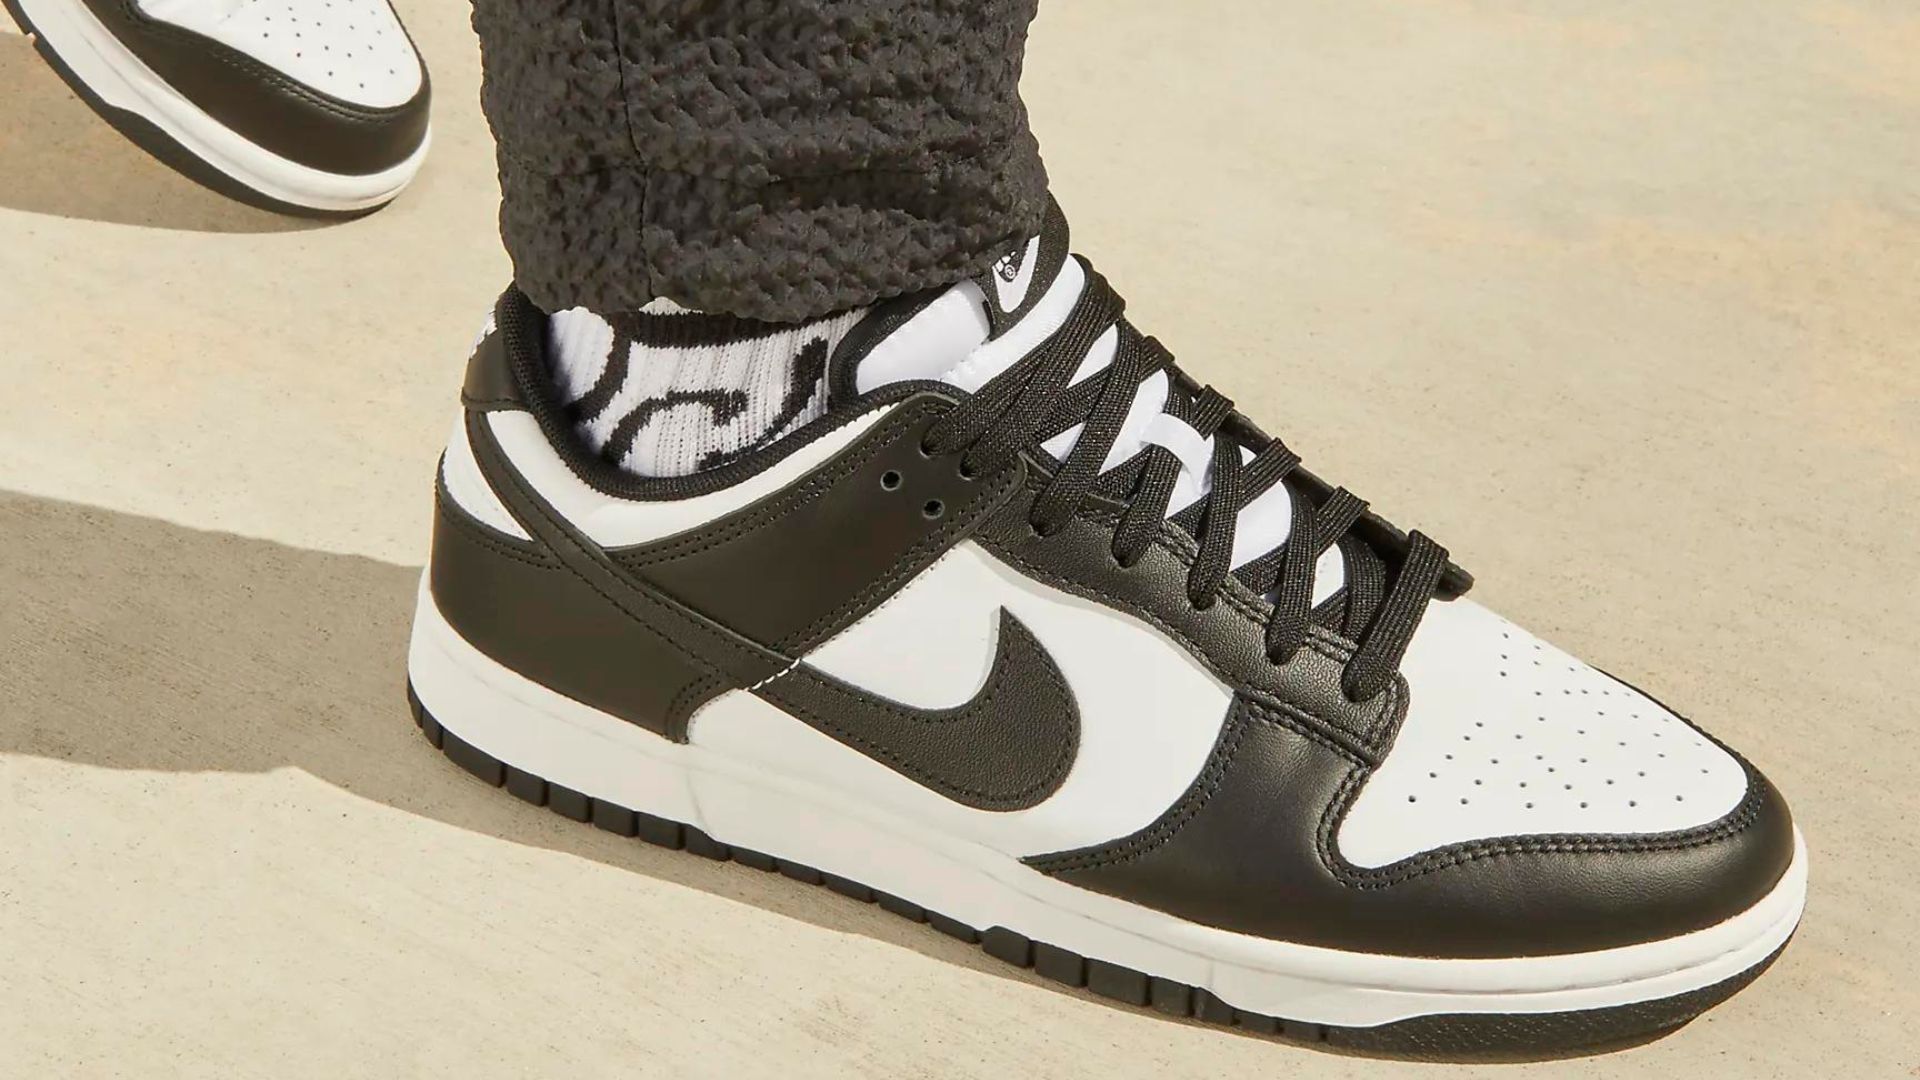 Nike Panda Dunks Restock Sneaker Details, Pricing And Where To Buy